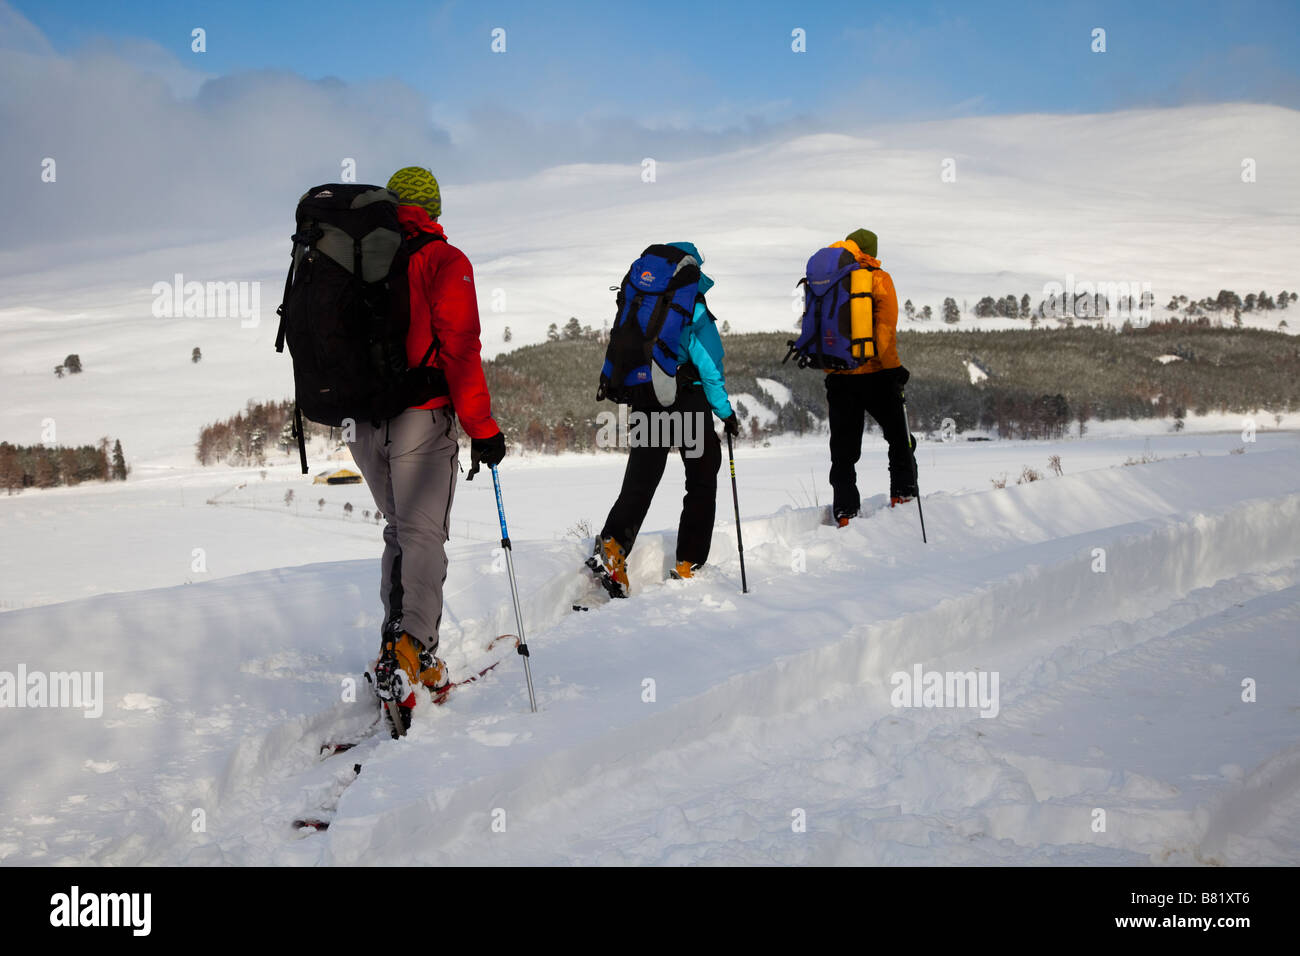 Scottish snow landscape with three people skiing.  Male & female skiers after snowfall, Braemar, Cairngorms National Park, Highlands, Scotland, UK Stock Photo